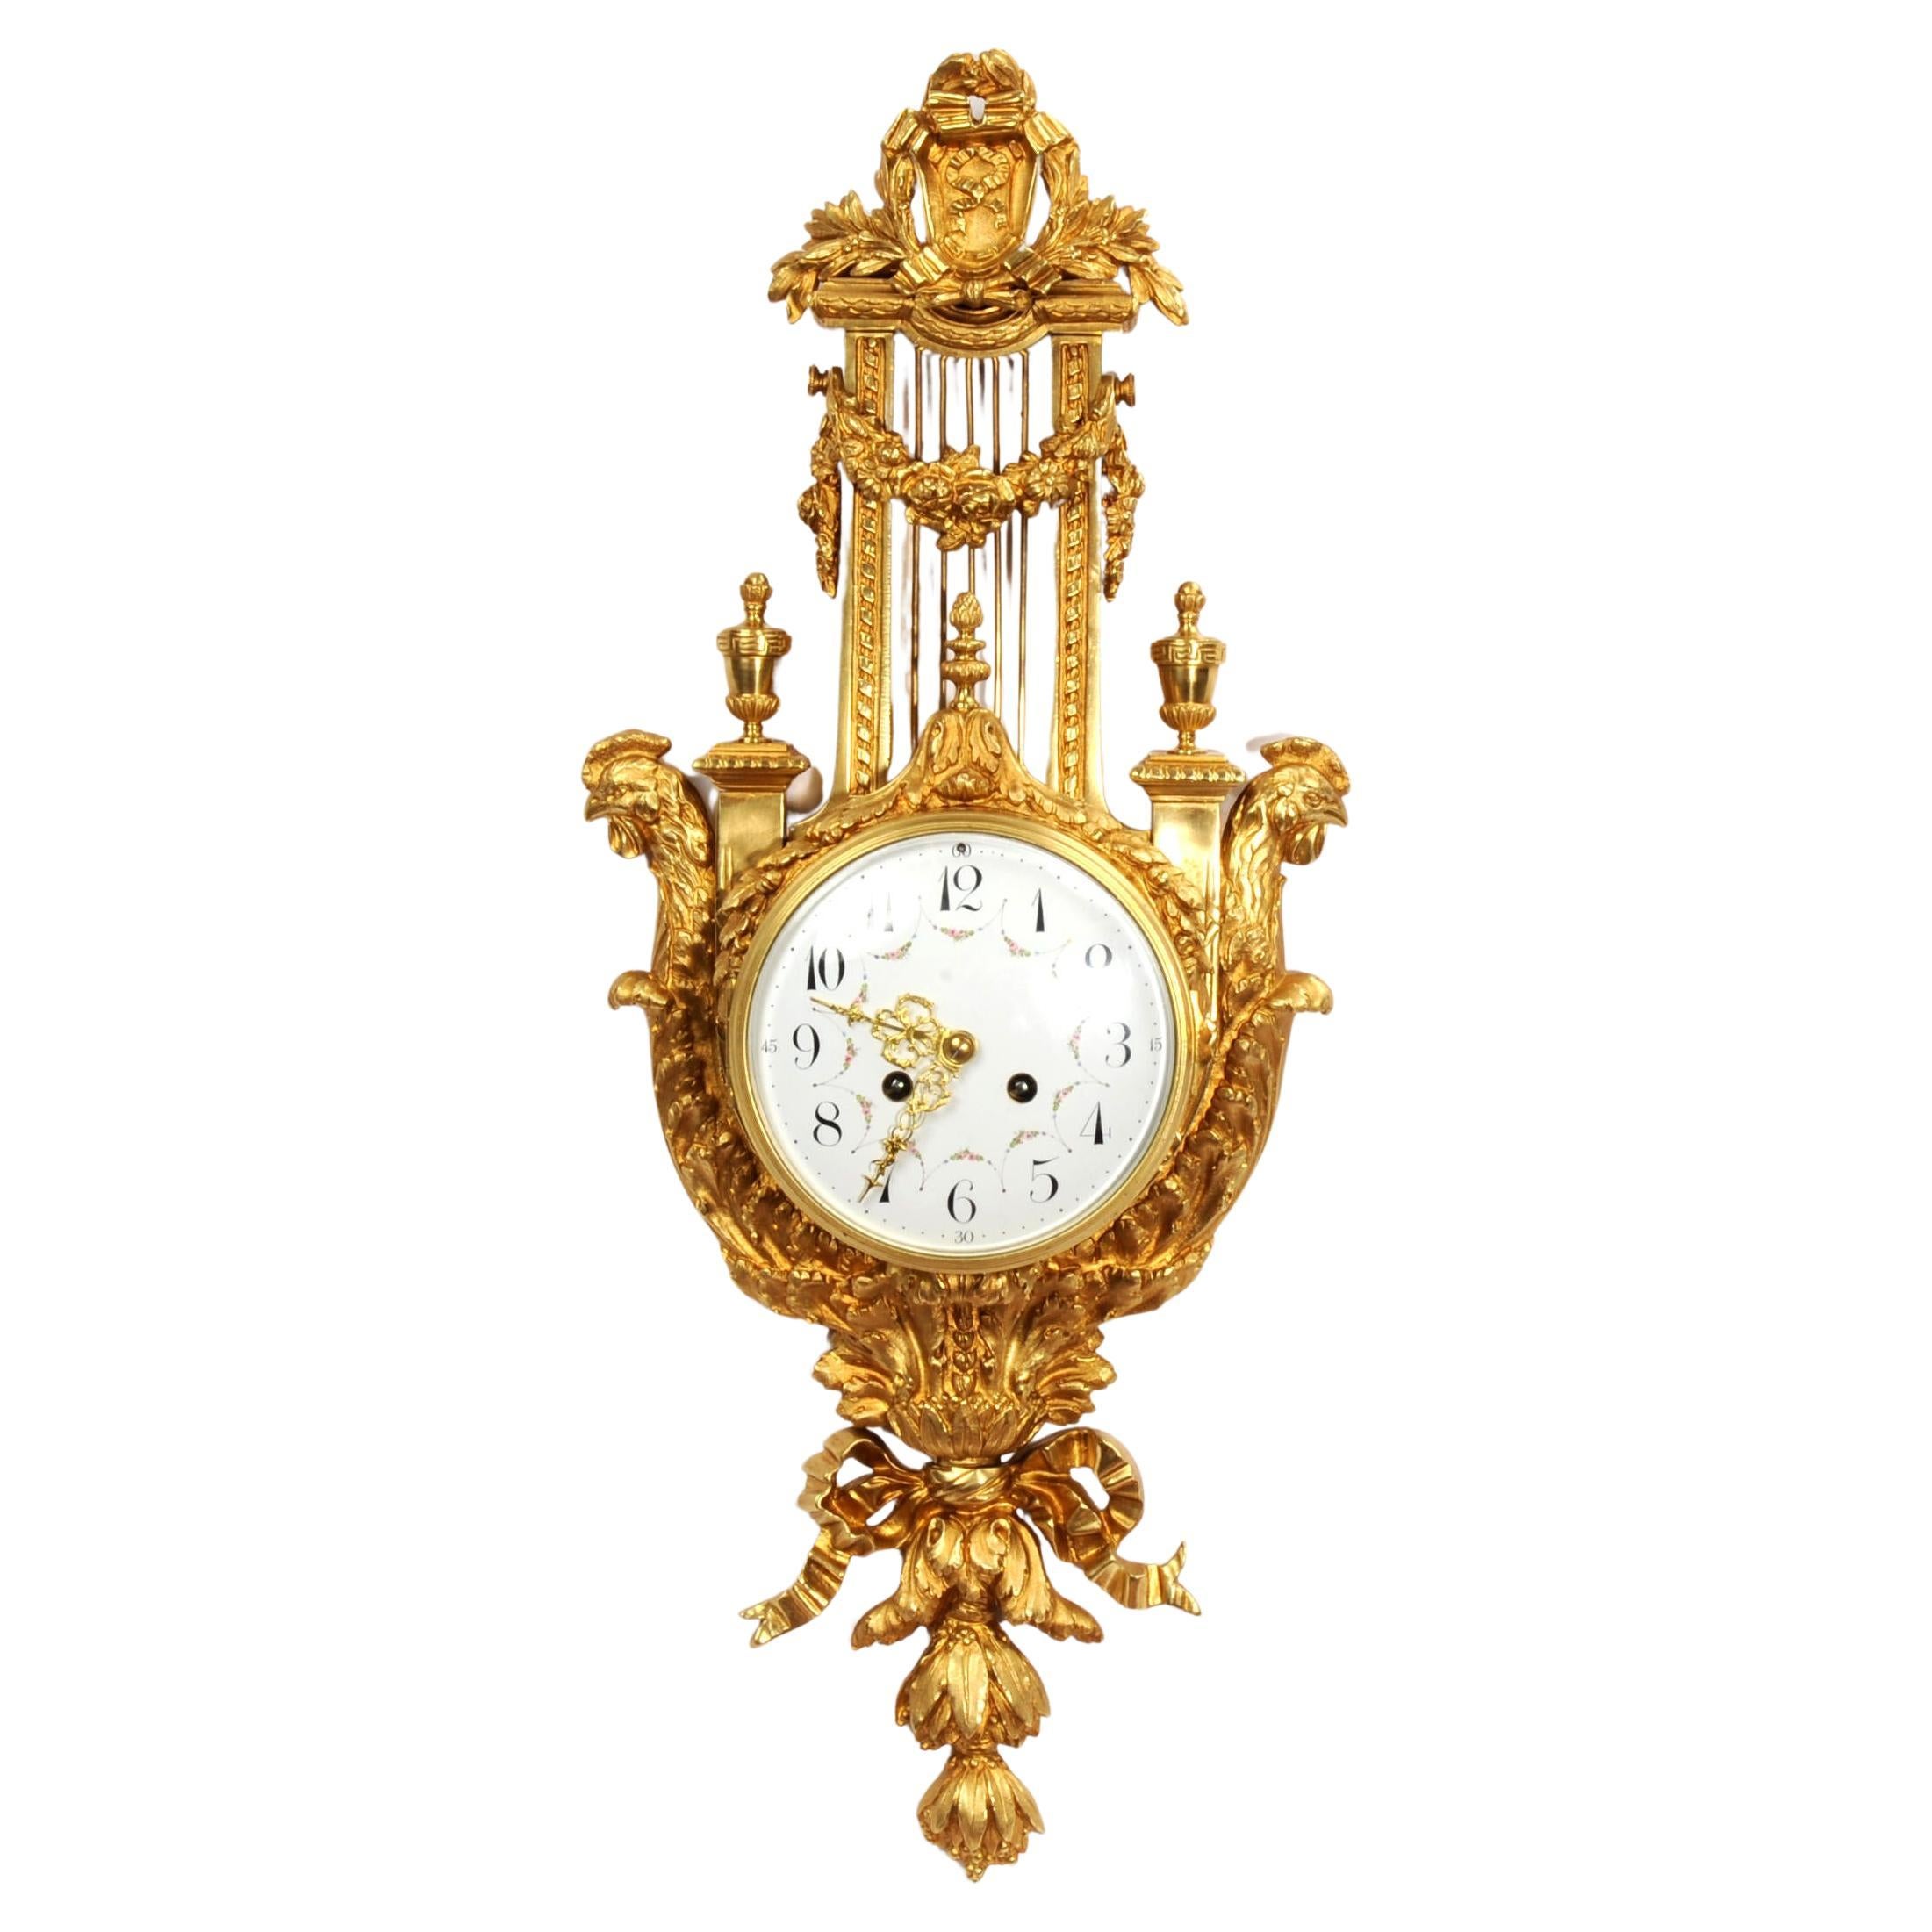 Antique French Neoclassical Ormolu Lyre Cartel Wall Clock